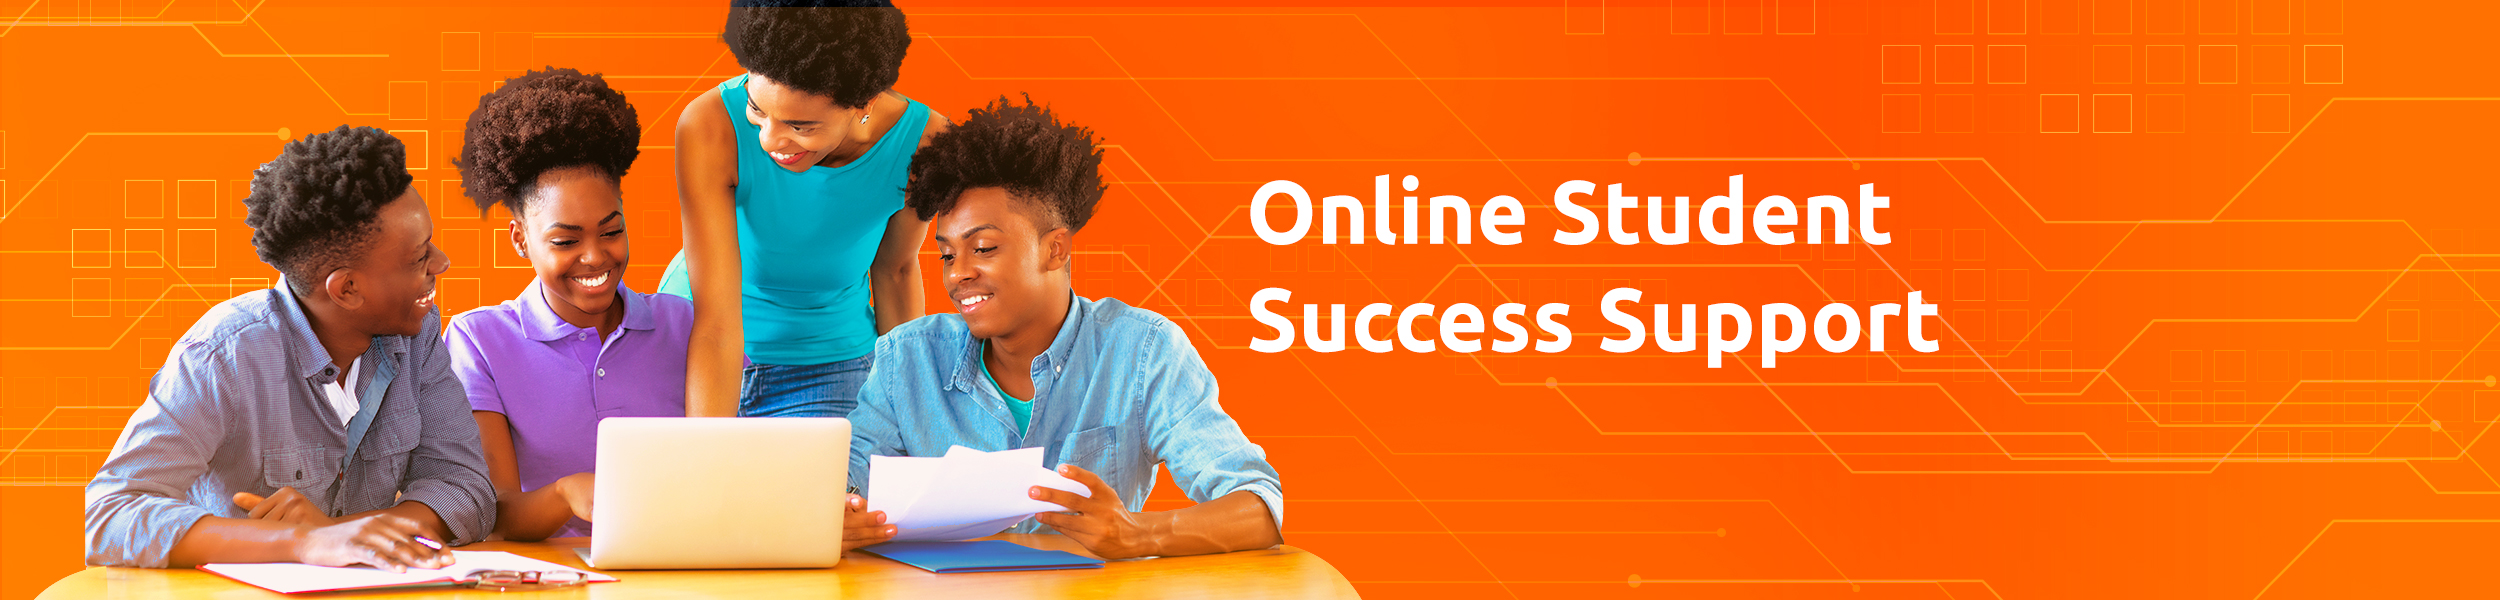 Adc Online Student Success Support